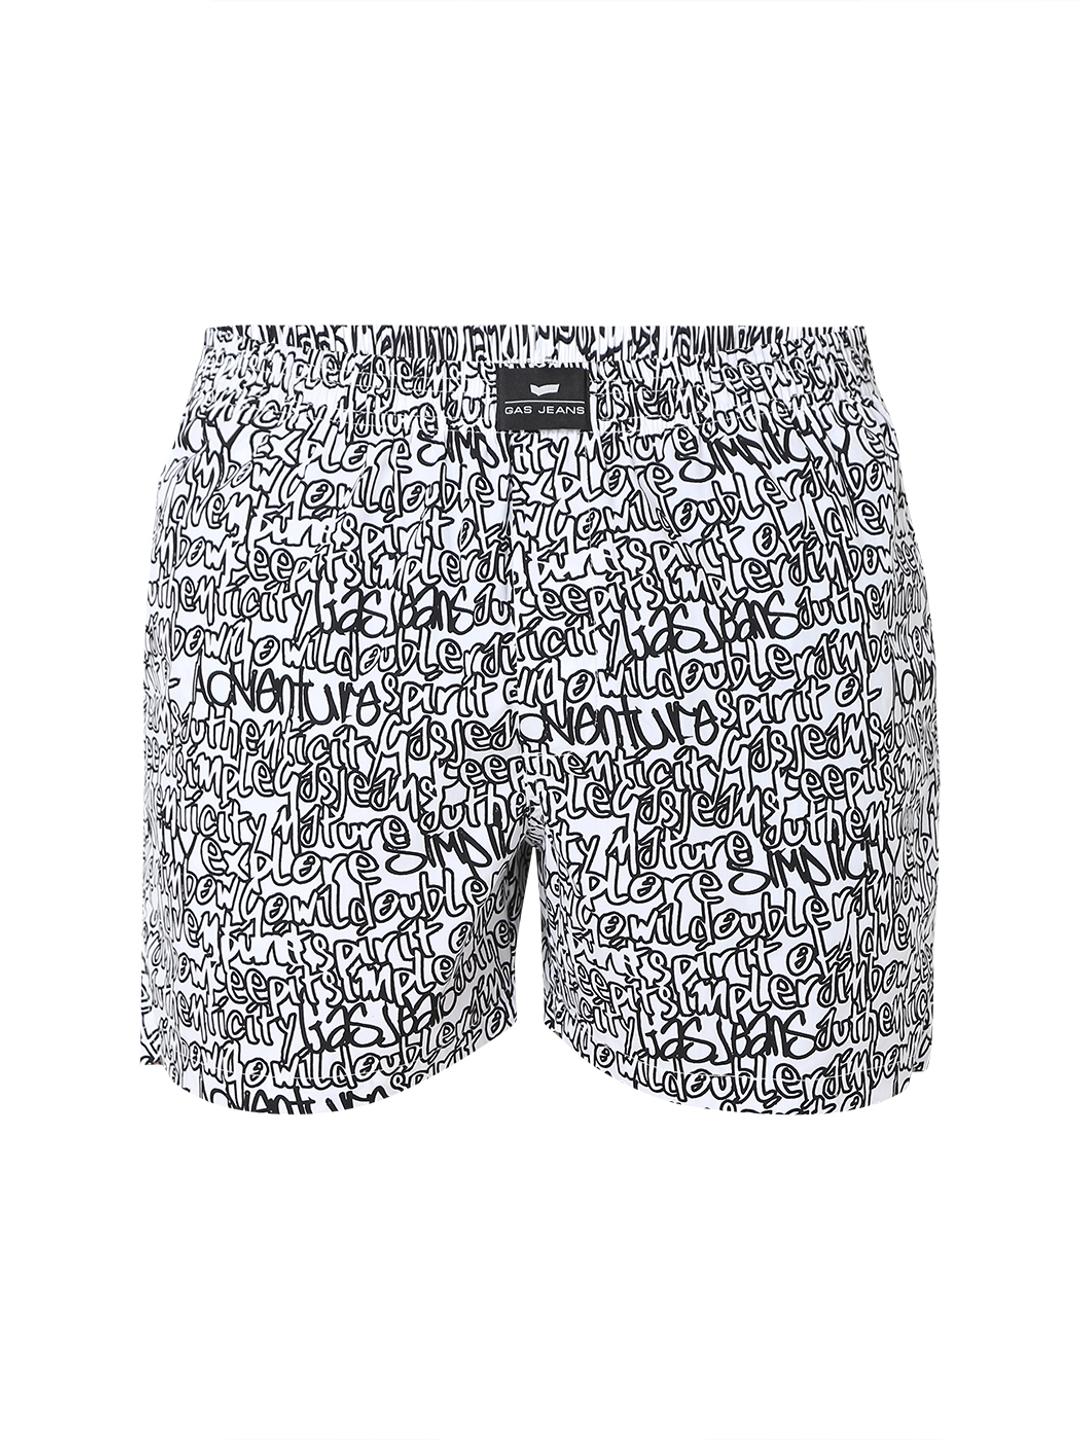 Abstract Classic Boxers